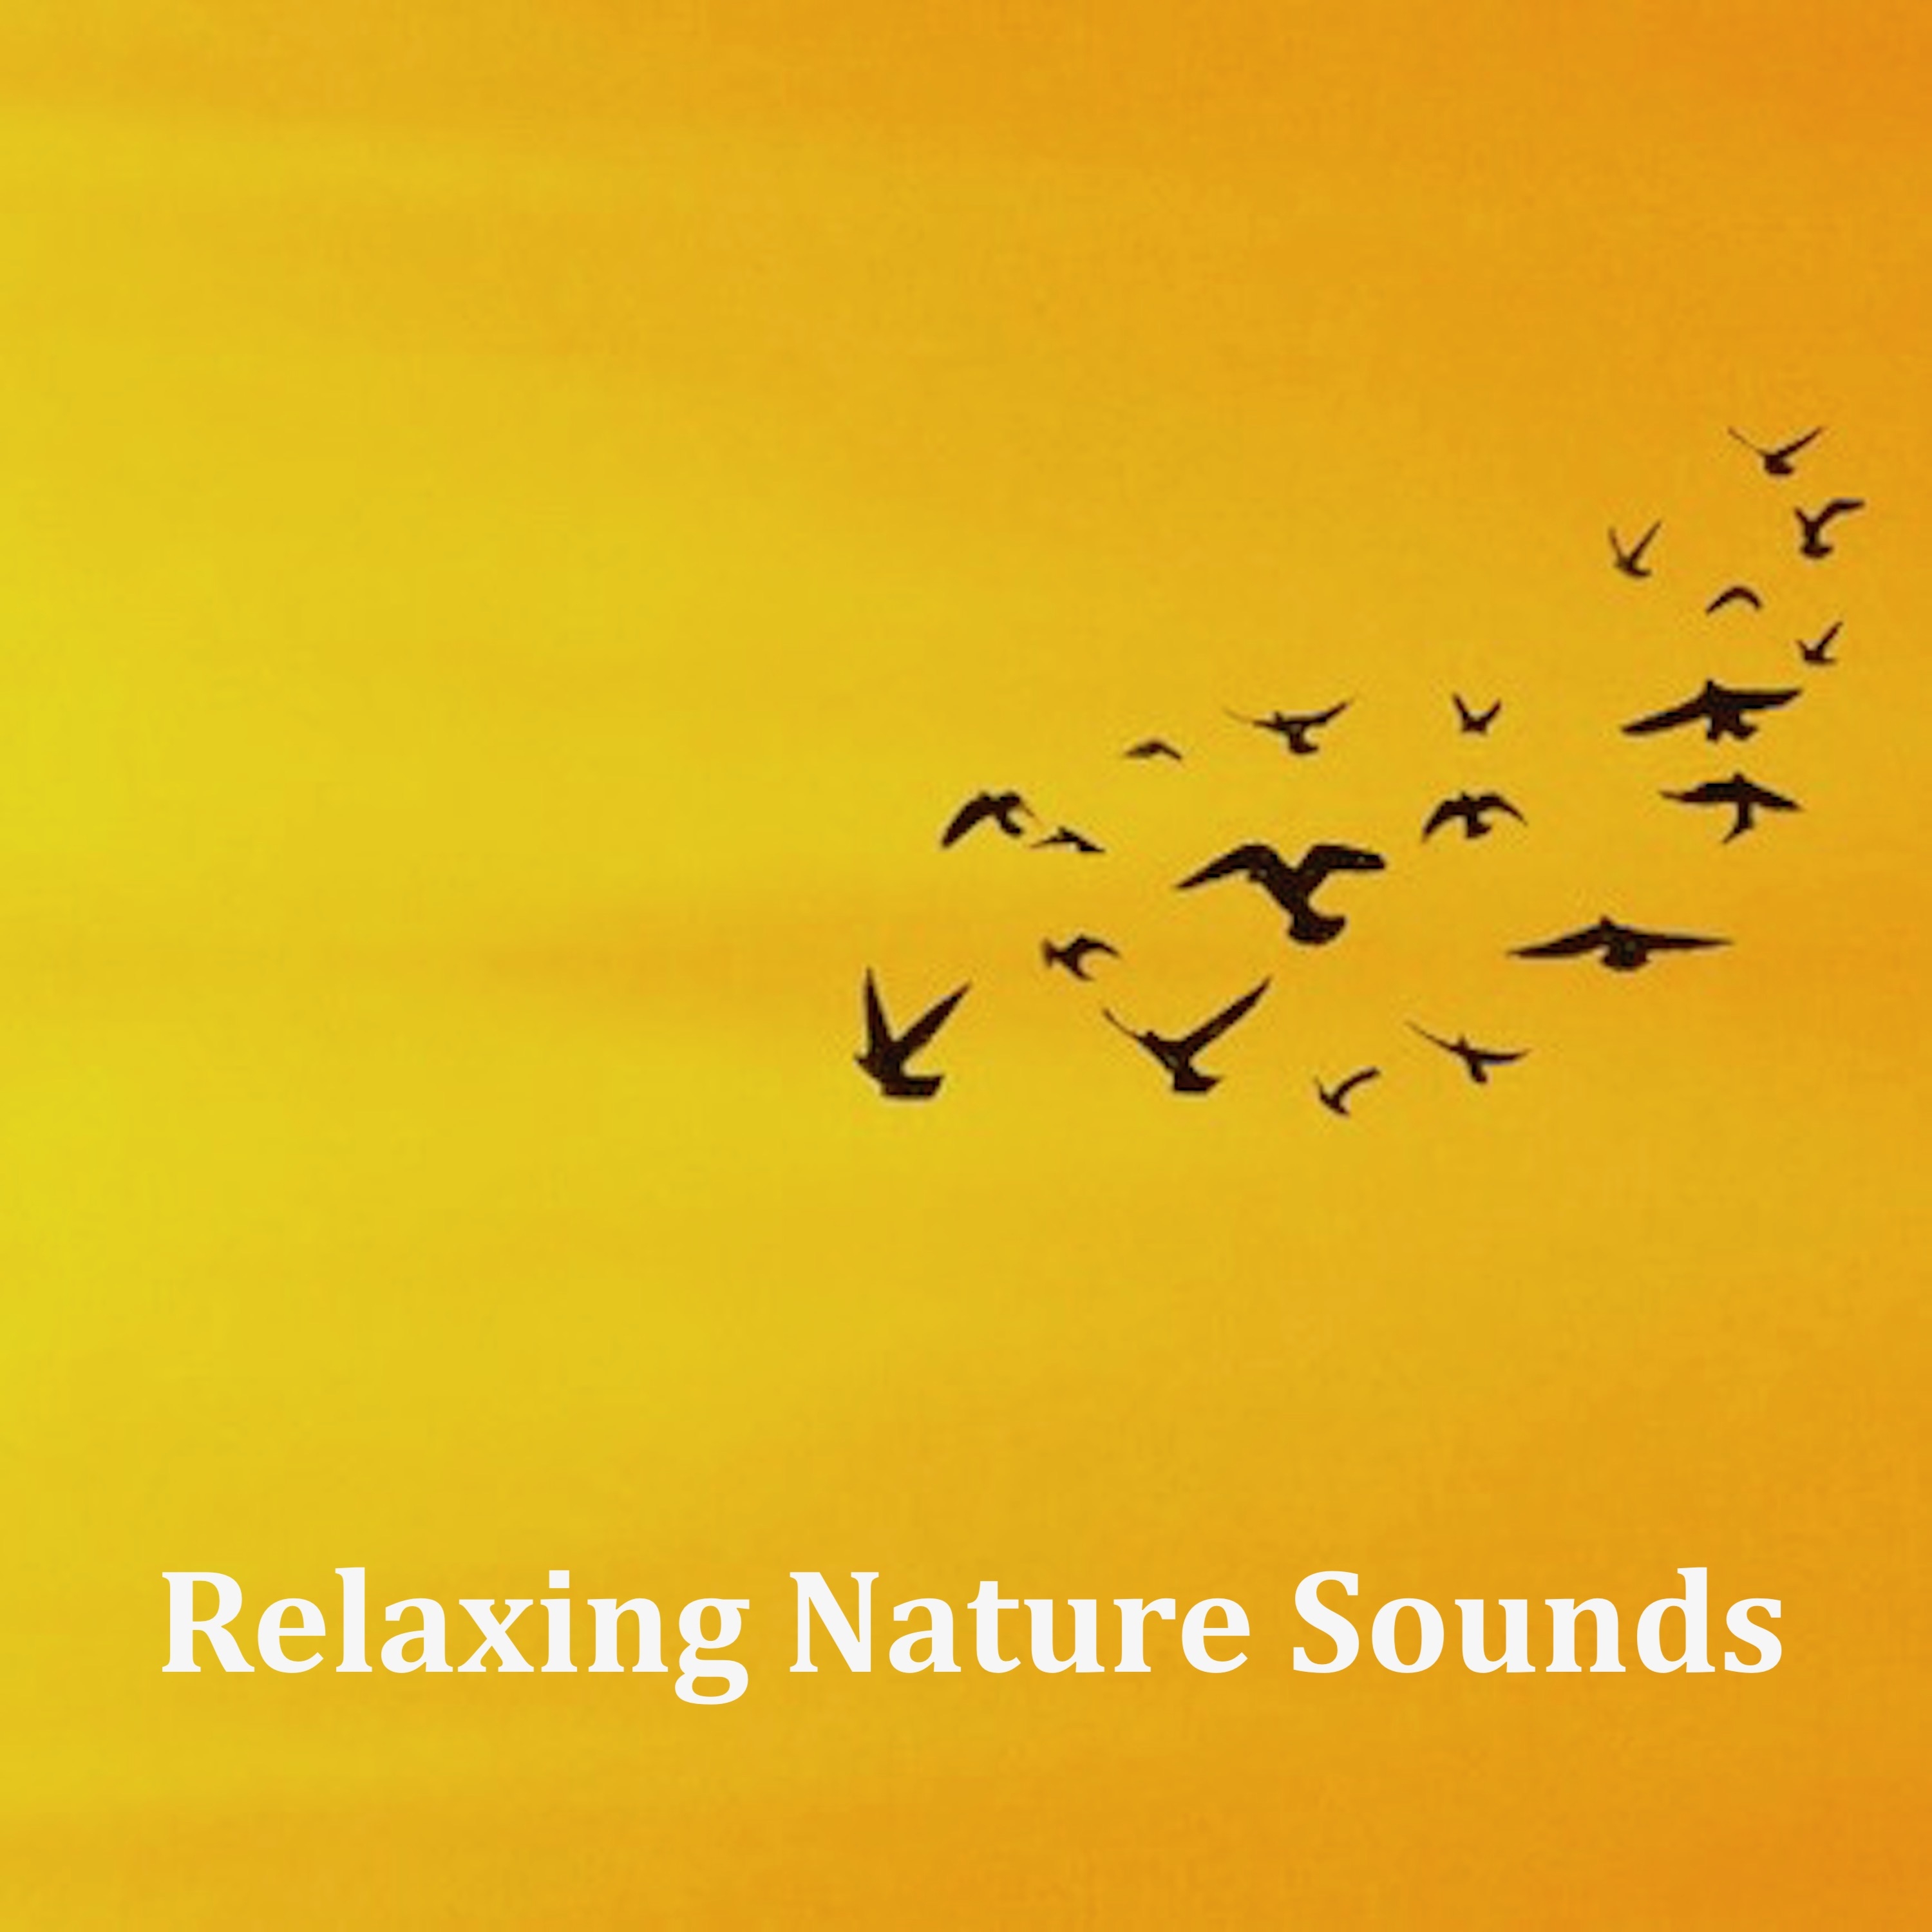 16 Relaxing Nature Sounds for Spa and Wellbeing